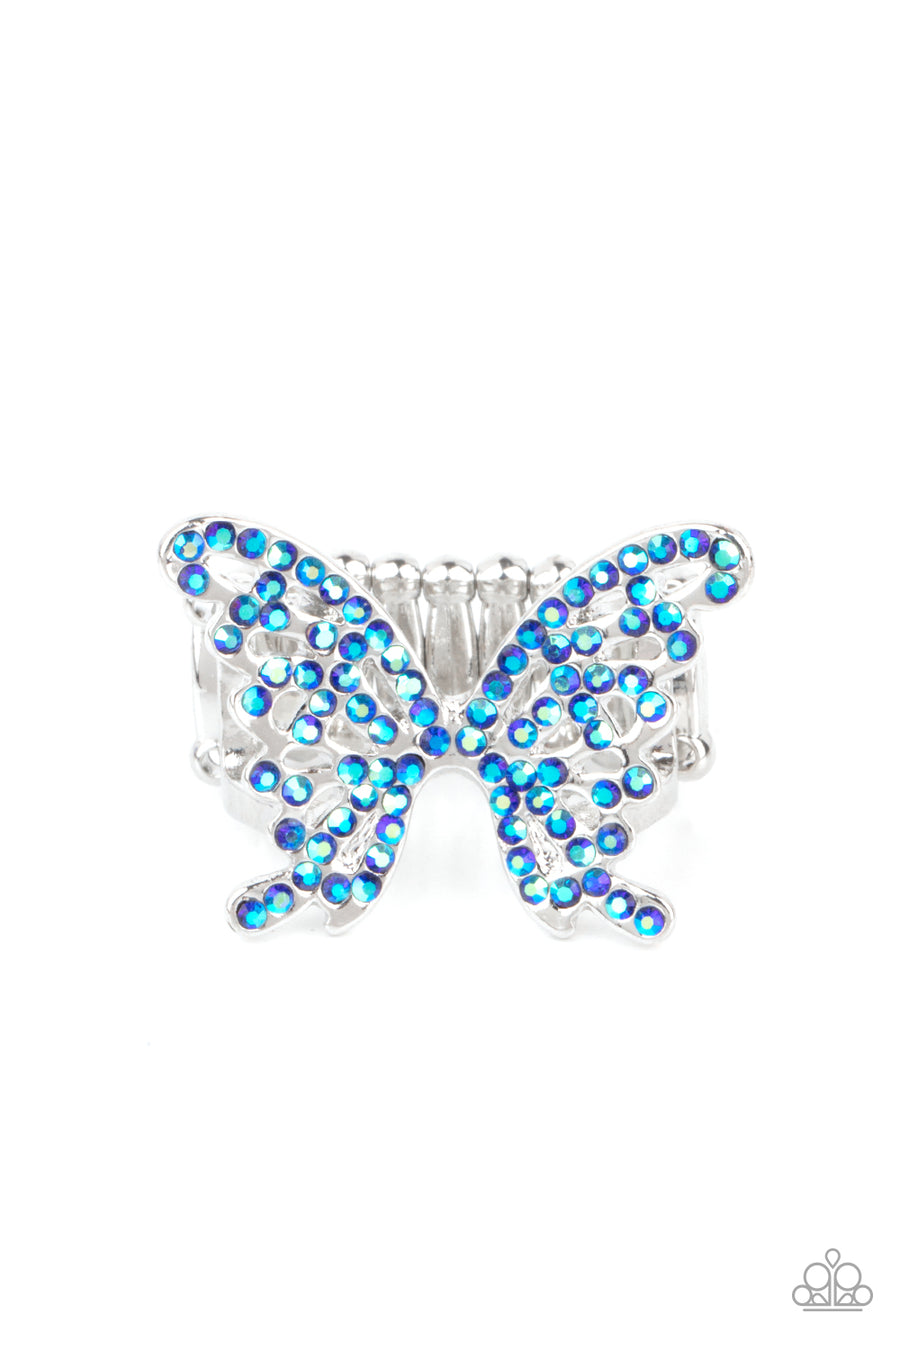 Butterfly Orchard - Blue Rhinestone Butterfly Ring - Paparrazi Accessories